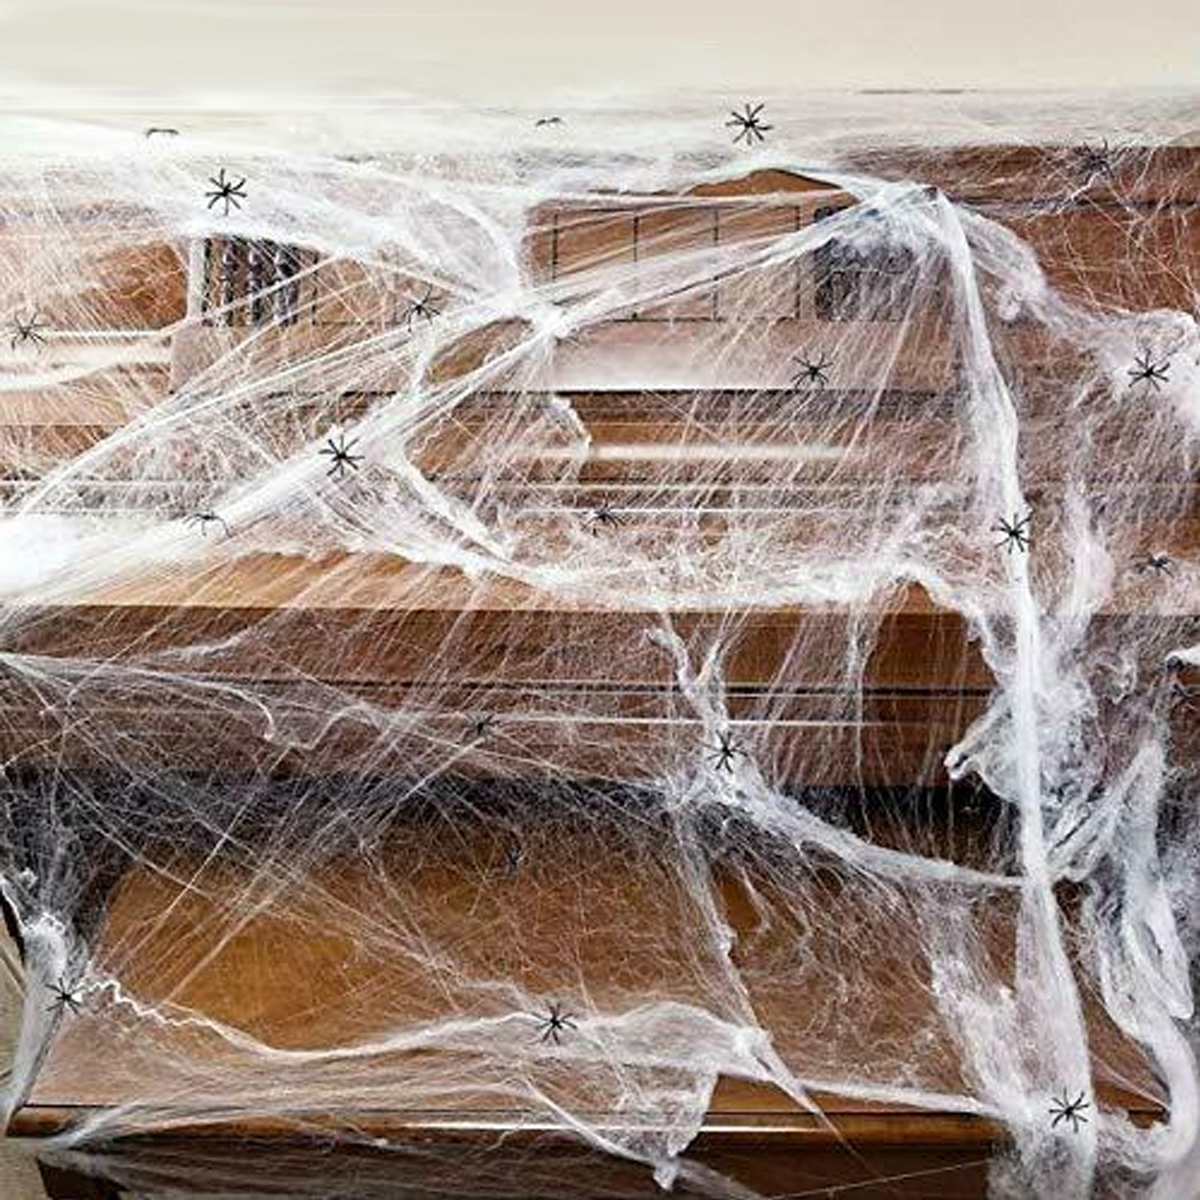 250g-Spider-Web-With-48Pcs-Small-Spiders-Halloween-Outdoor-Party-Decorations-Props-Supplies-1730880-4